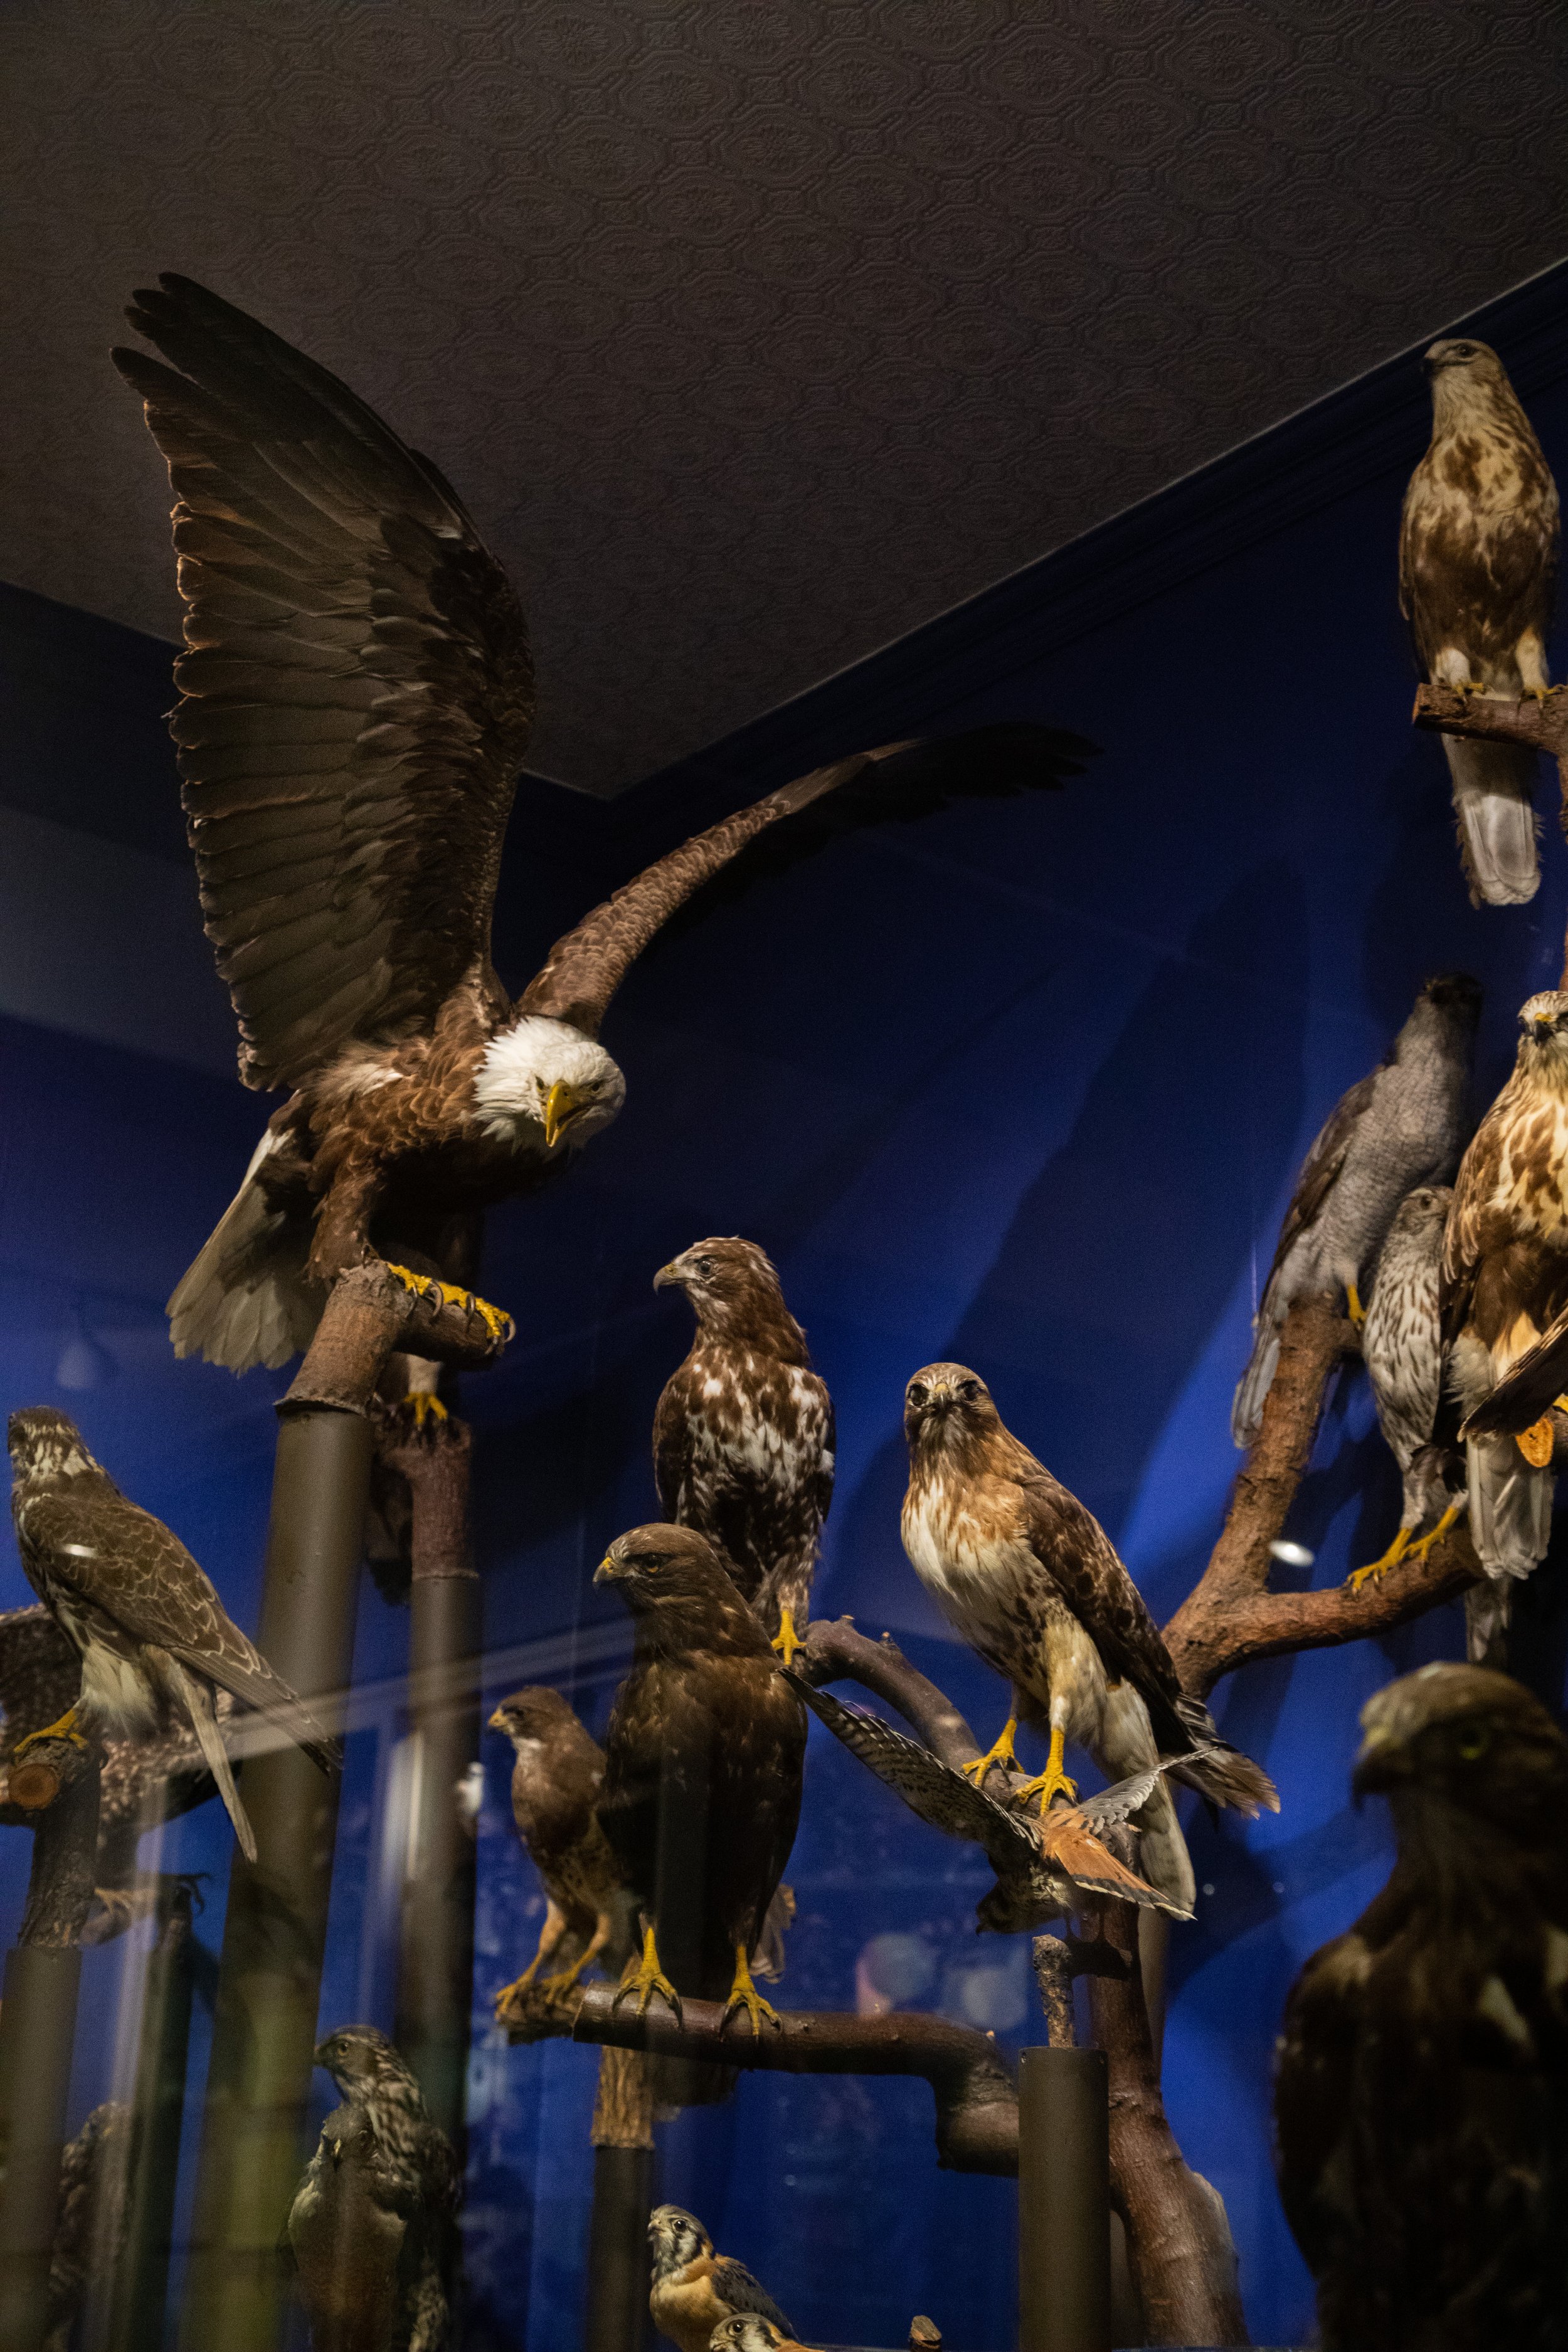  The Birds of Prey display at the John Edson Hall of Birds exhibit at Whatcom Museum. // Photo by Emily Davis 